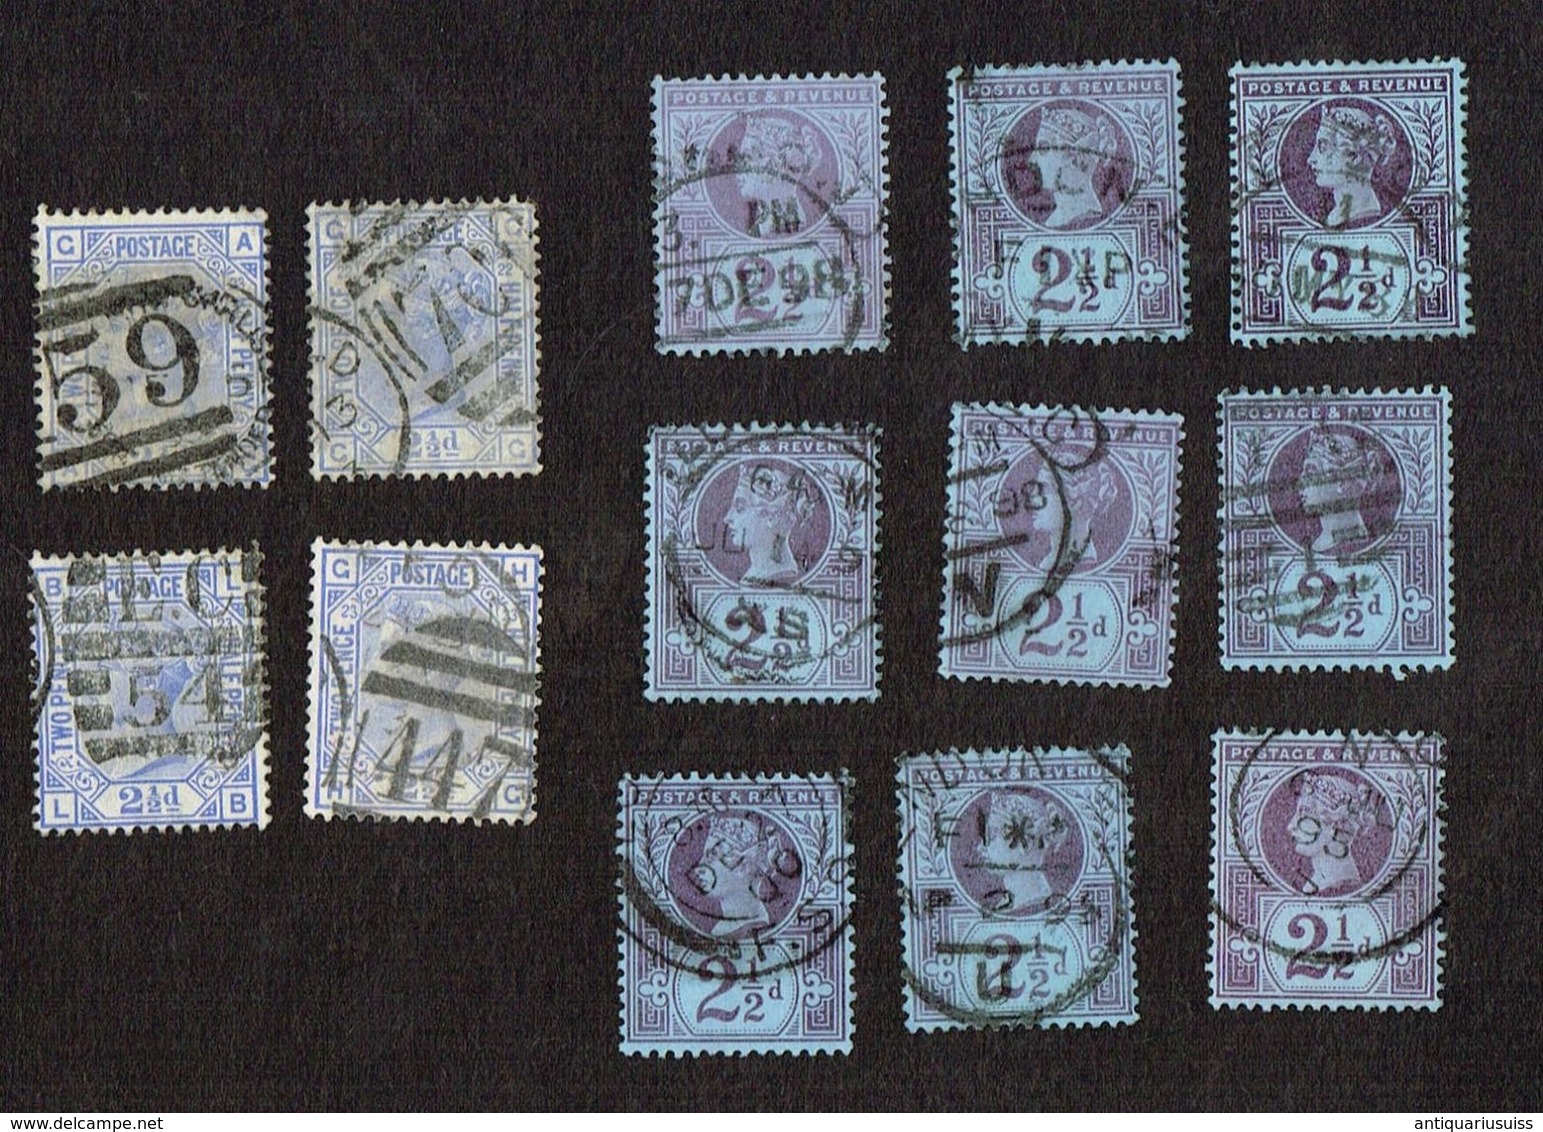 26 Stamps - POSTAGE ONE PENNY - 1/2 - 2,1/2 D - Great Britain, Postage & Revenue - One Half Penny - Collections (sans Albums)